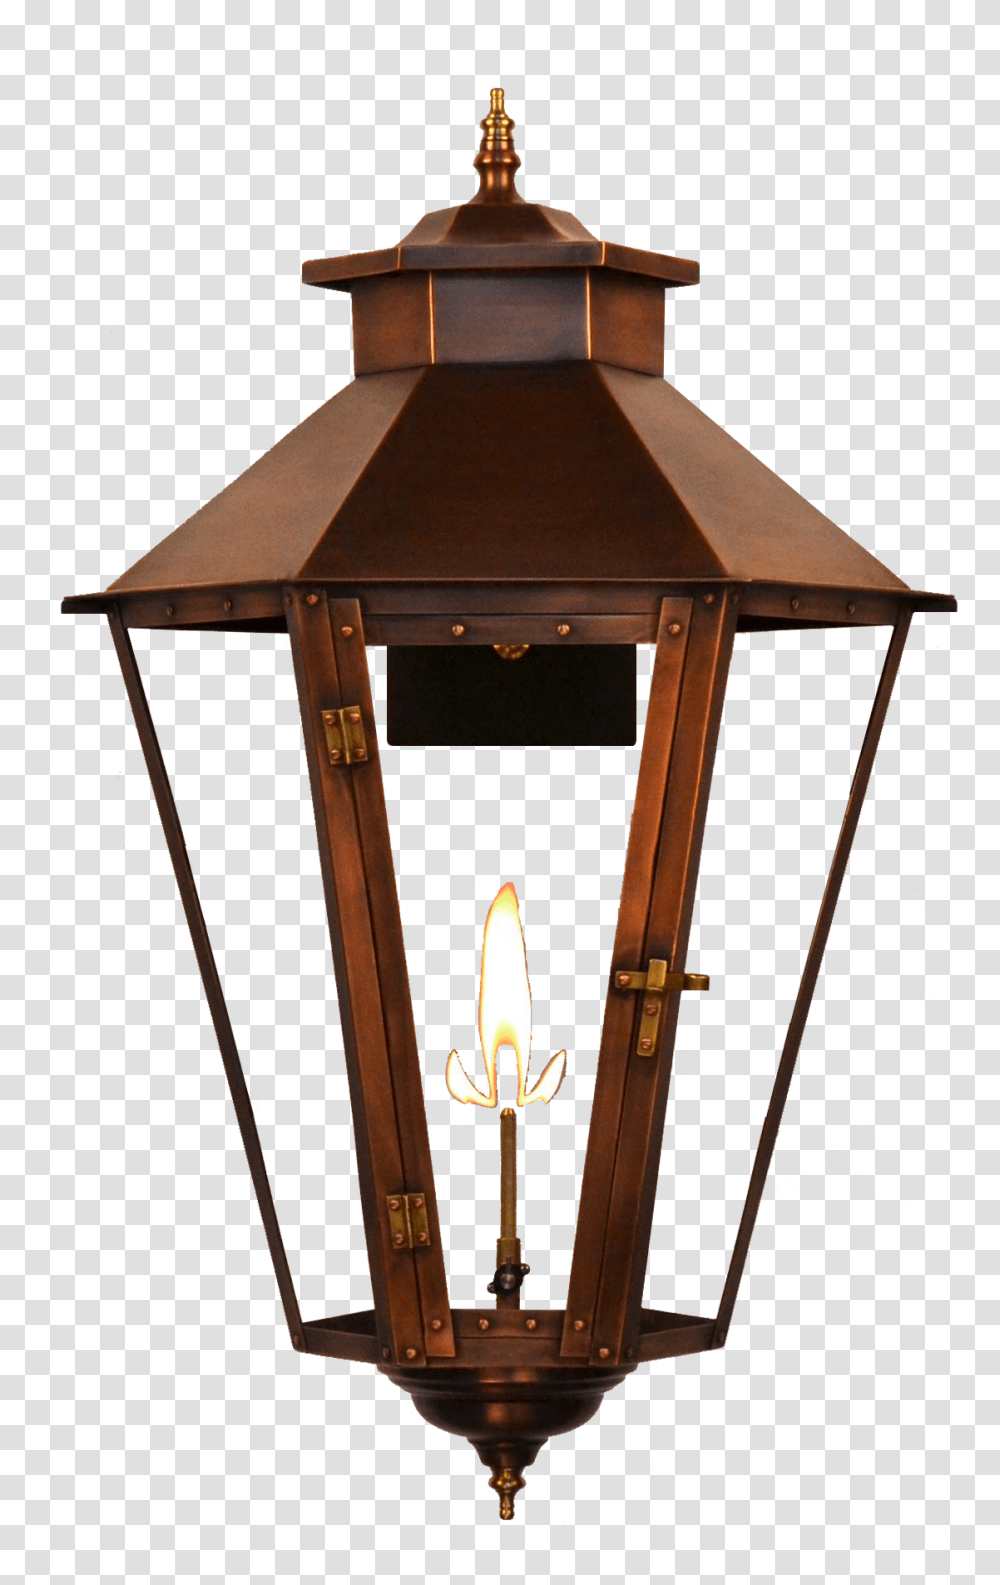 Fancy Light Image Coppersmith Royal Street, Lamp, Lantern, Candle, Lampshade Transparent Png